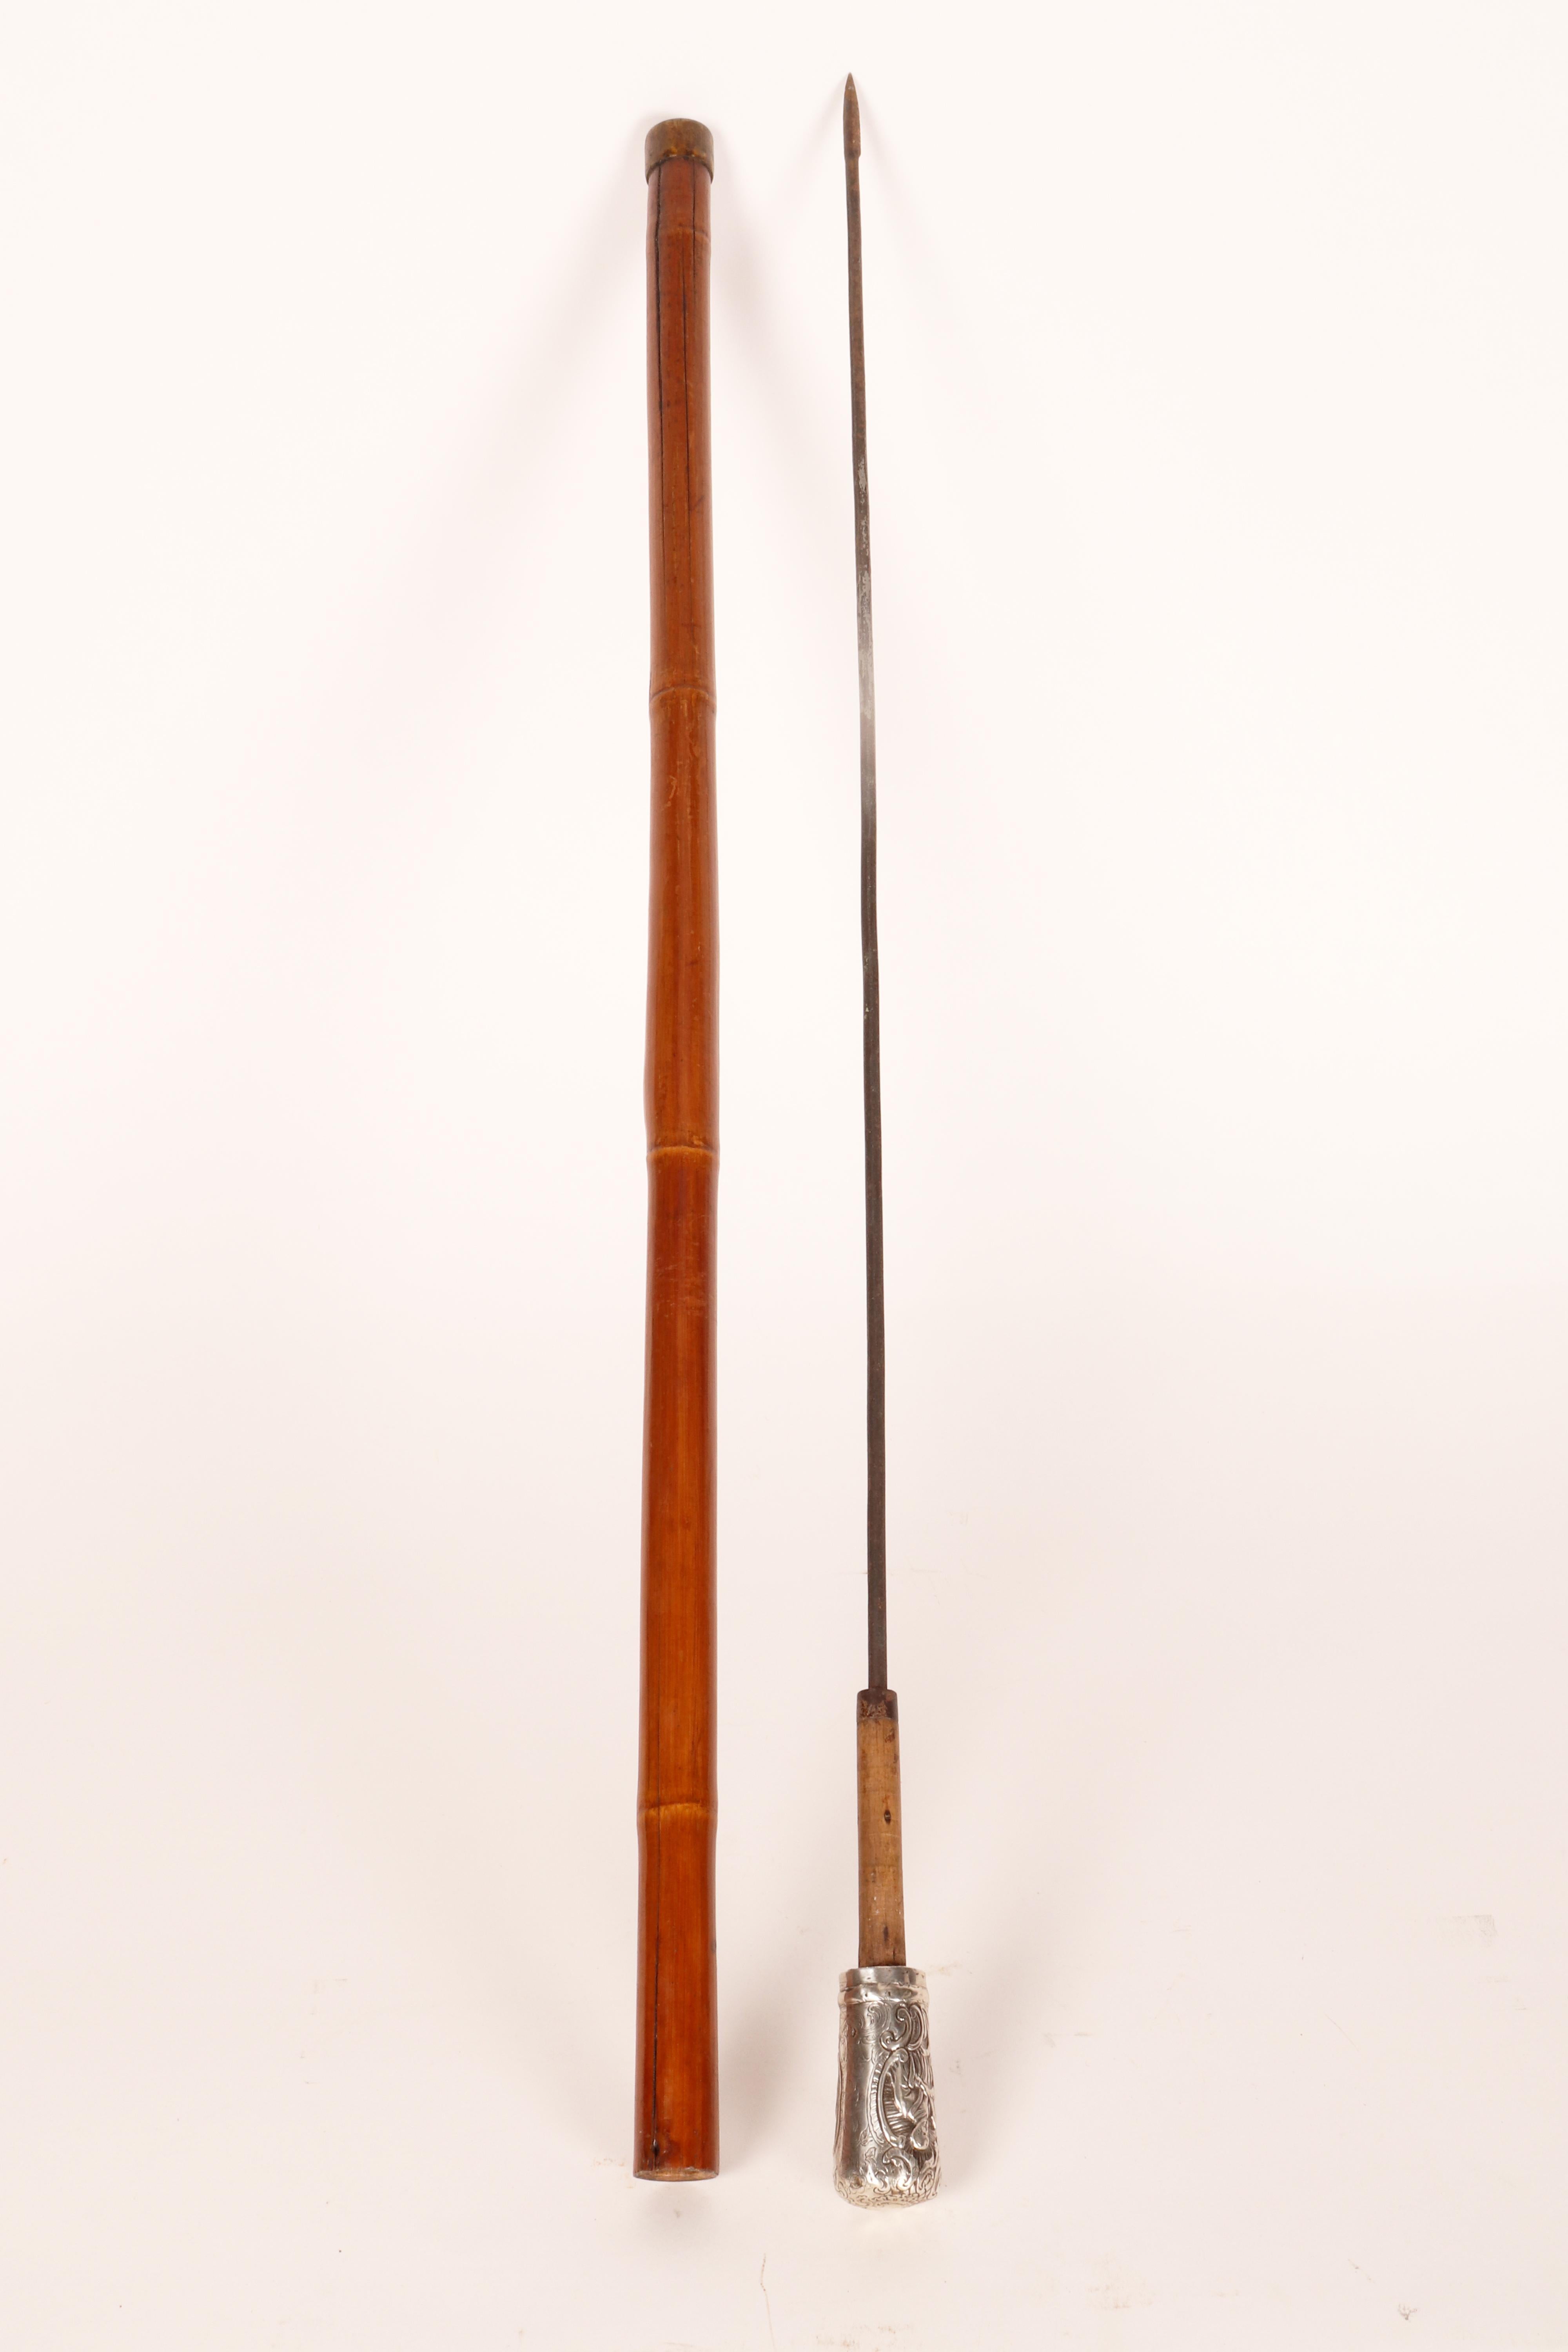 Customs officer's walking stick for goods inspection, Germany, 1870. For Sale 4